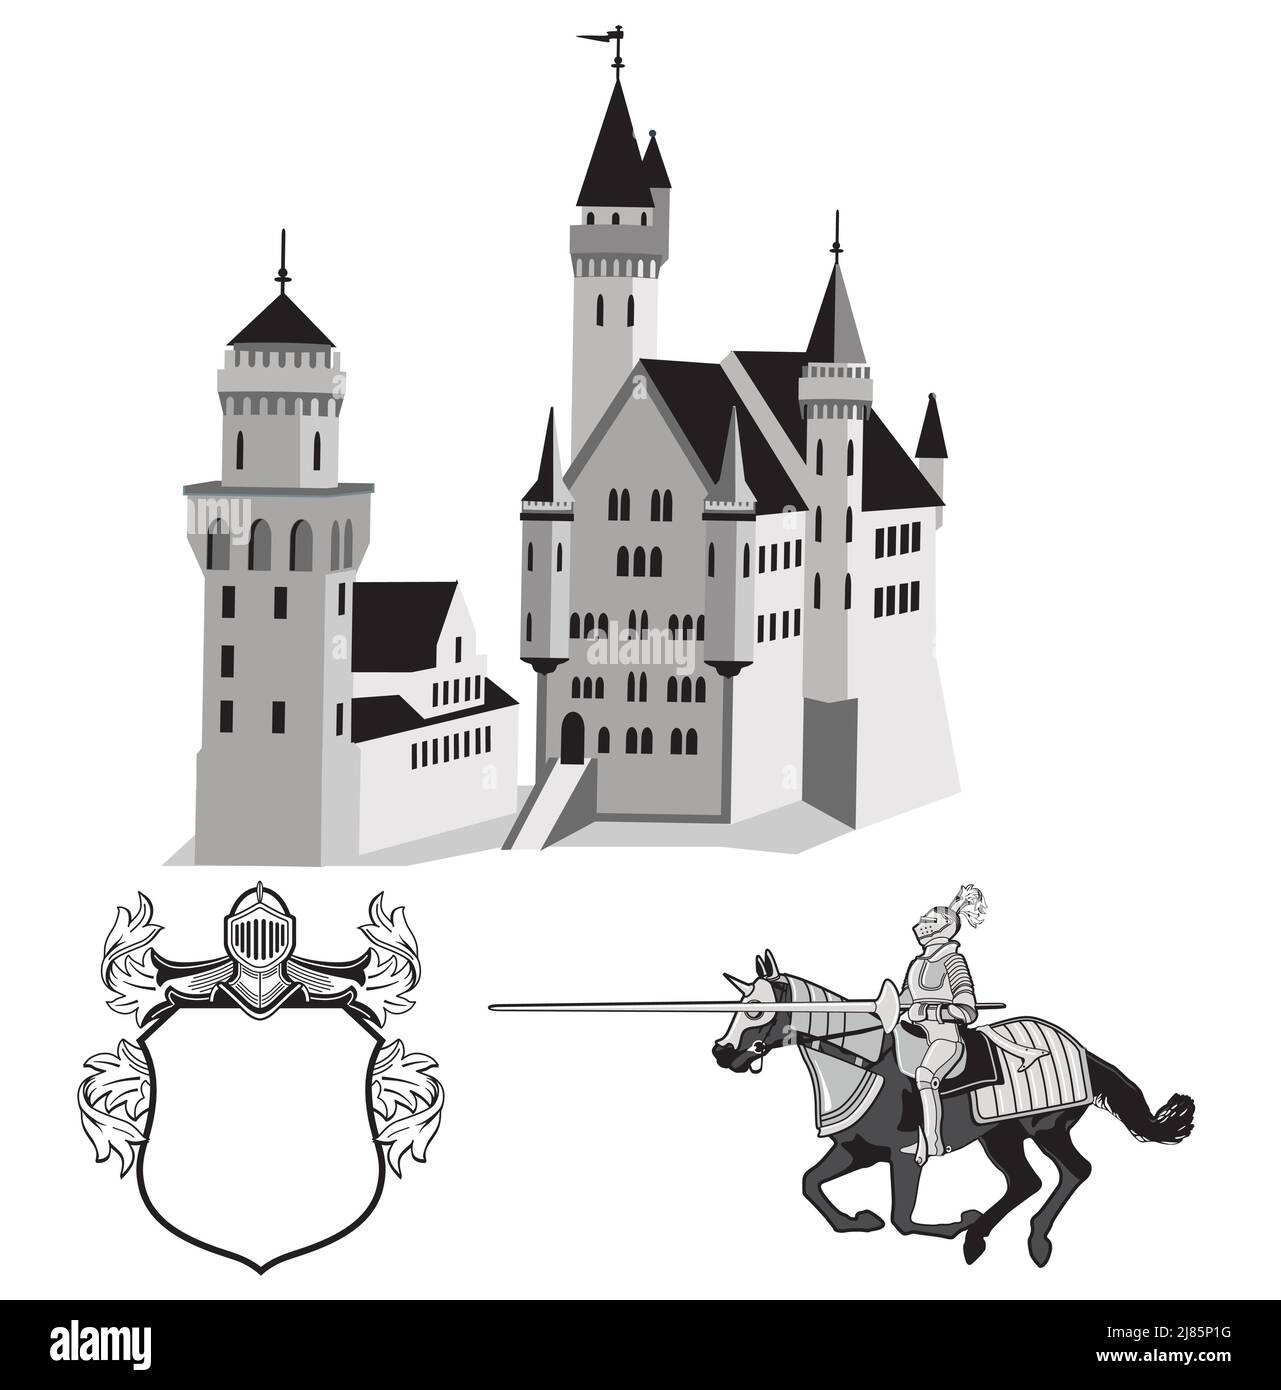 Knight's castle with knight and coat of arms illustration Stock Vector